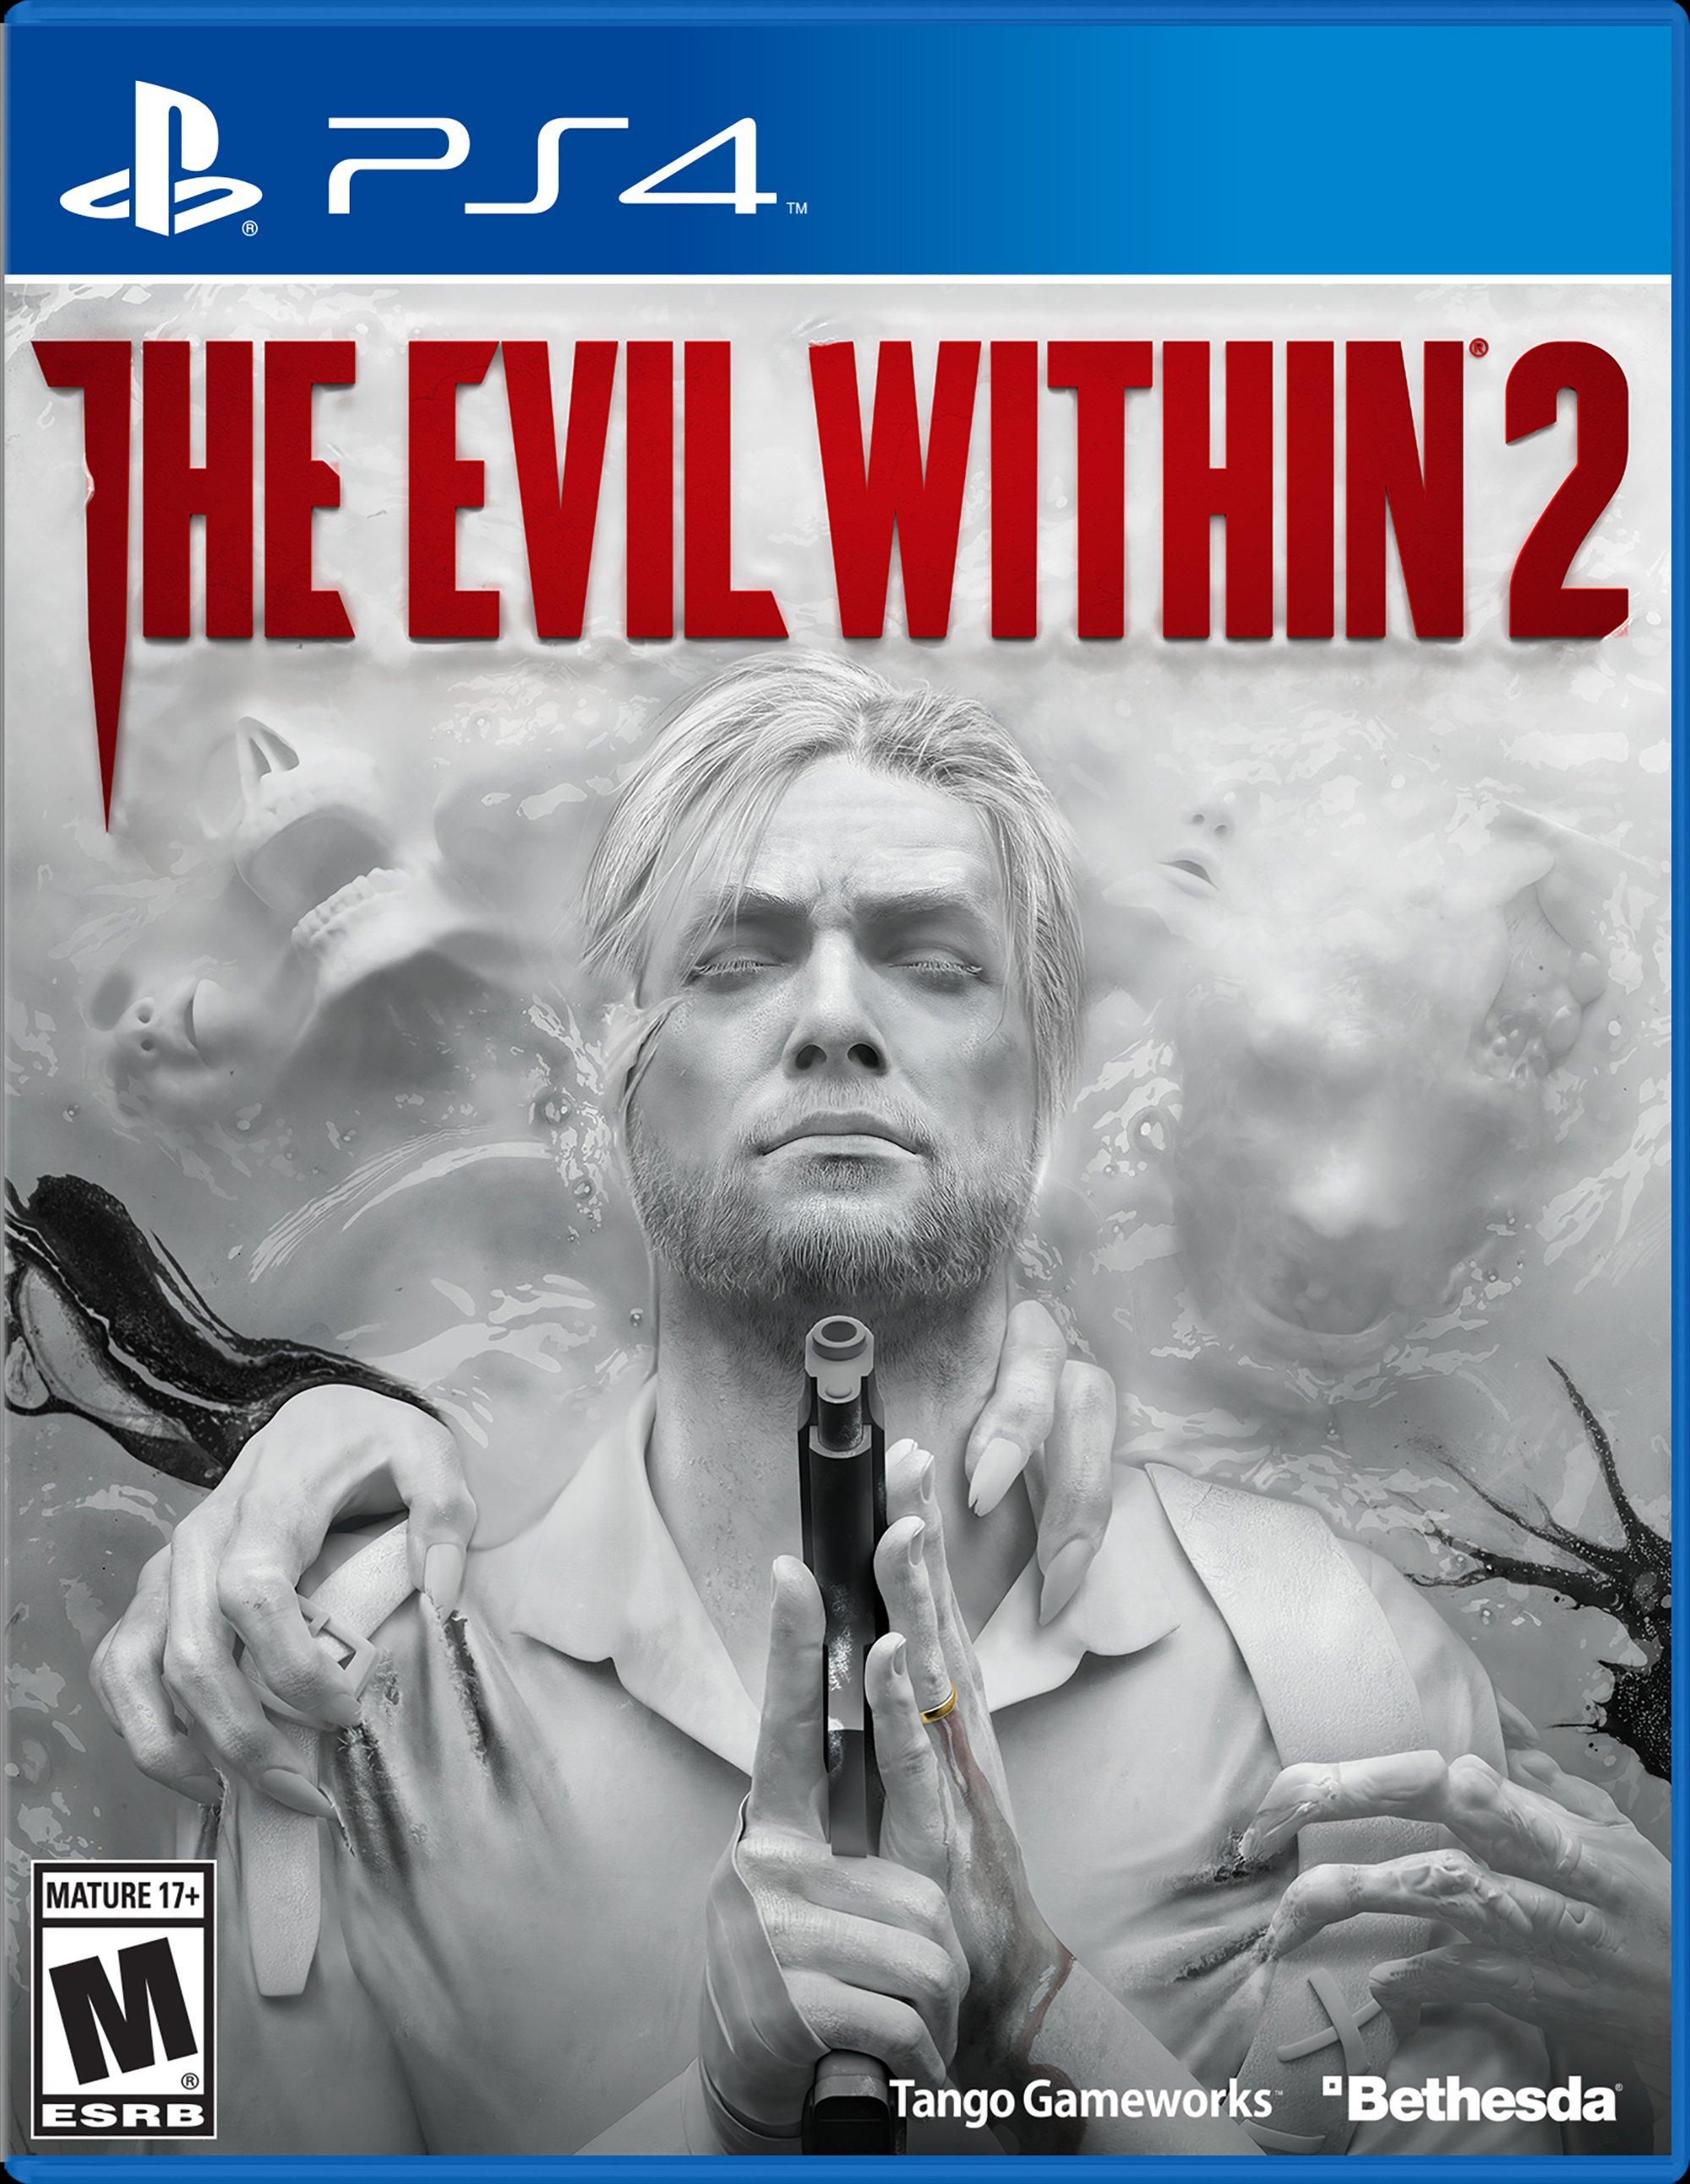 evil within ps4 price